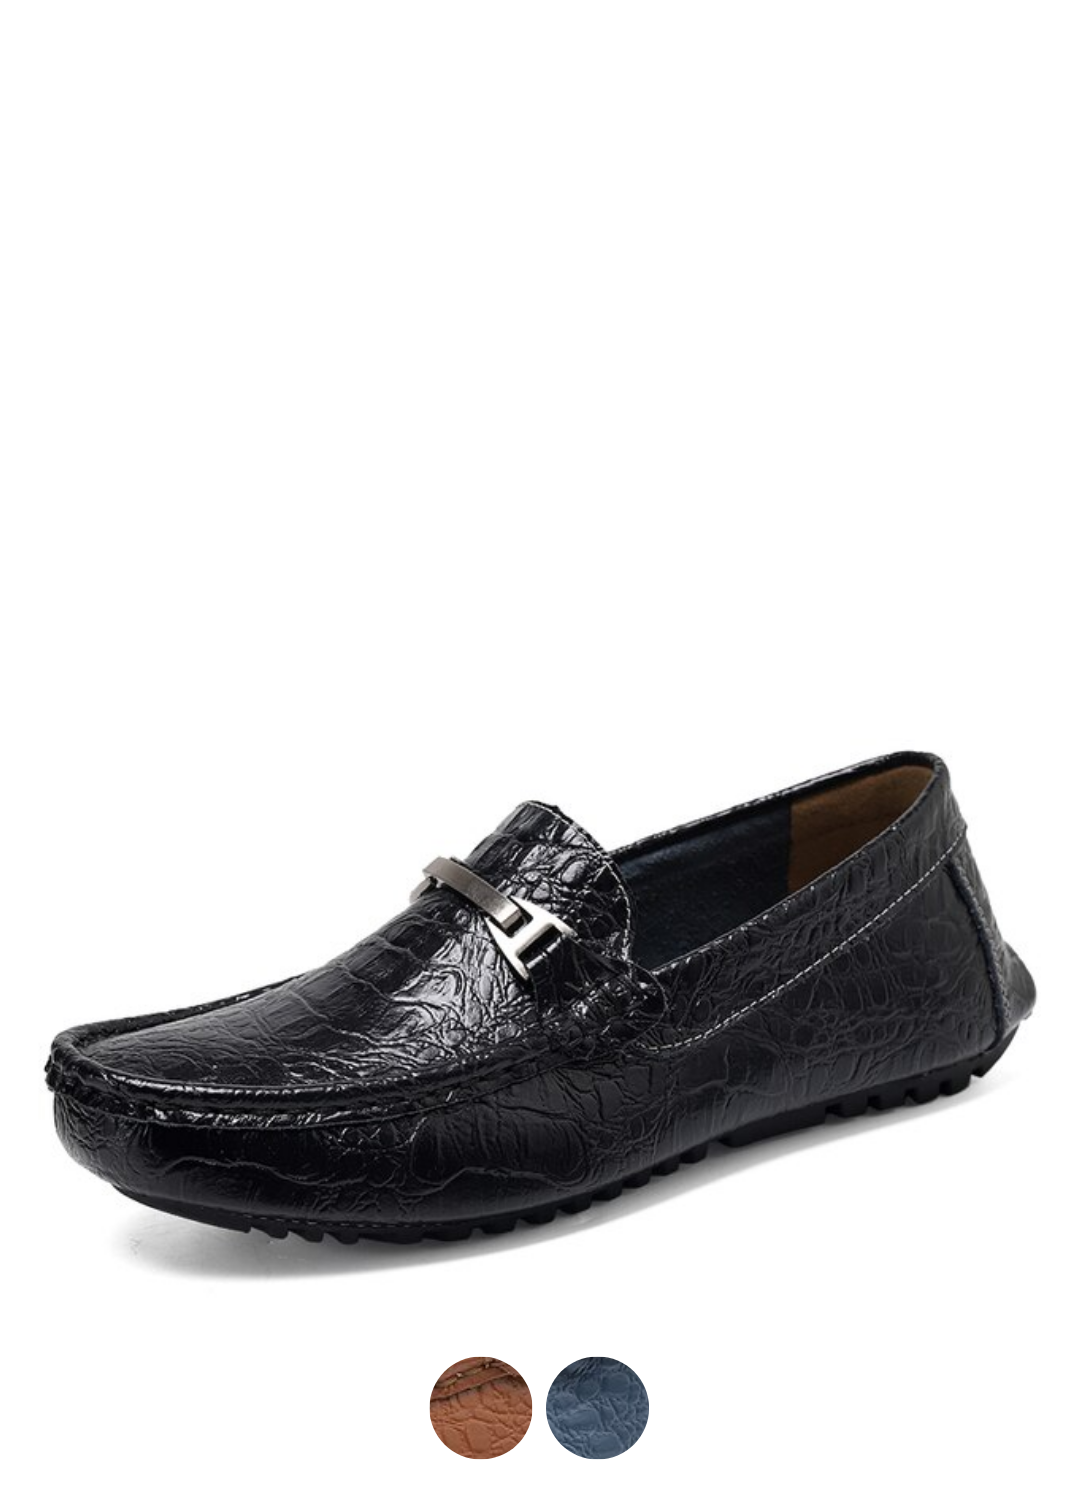 Neddy Men's Loafers Casual Shoes | Ultrasellershoes.com – USS® Shoes